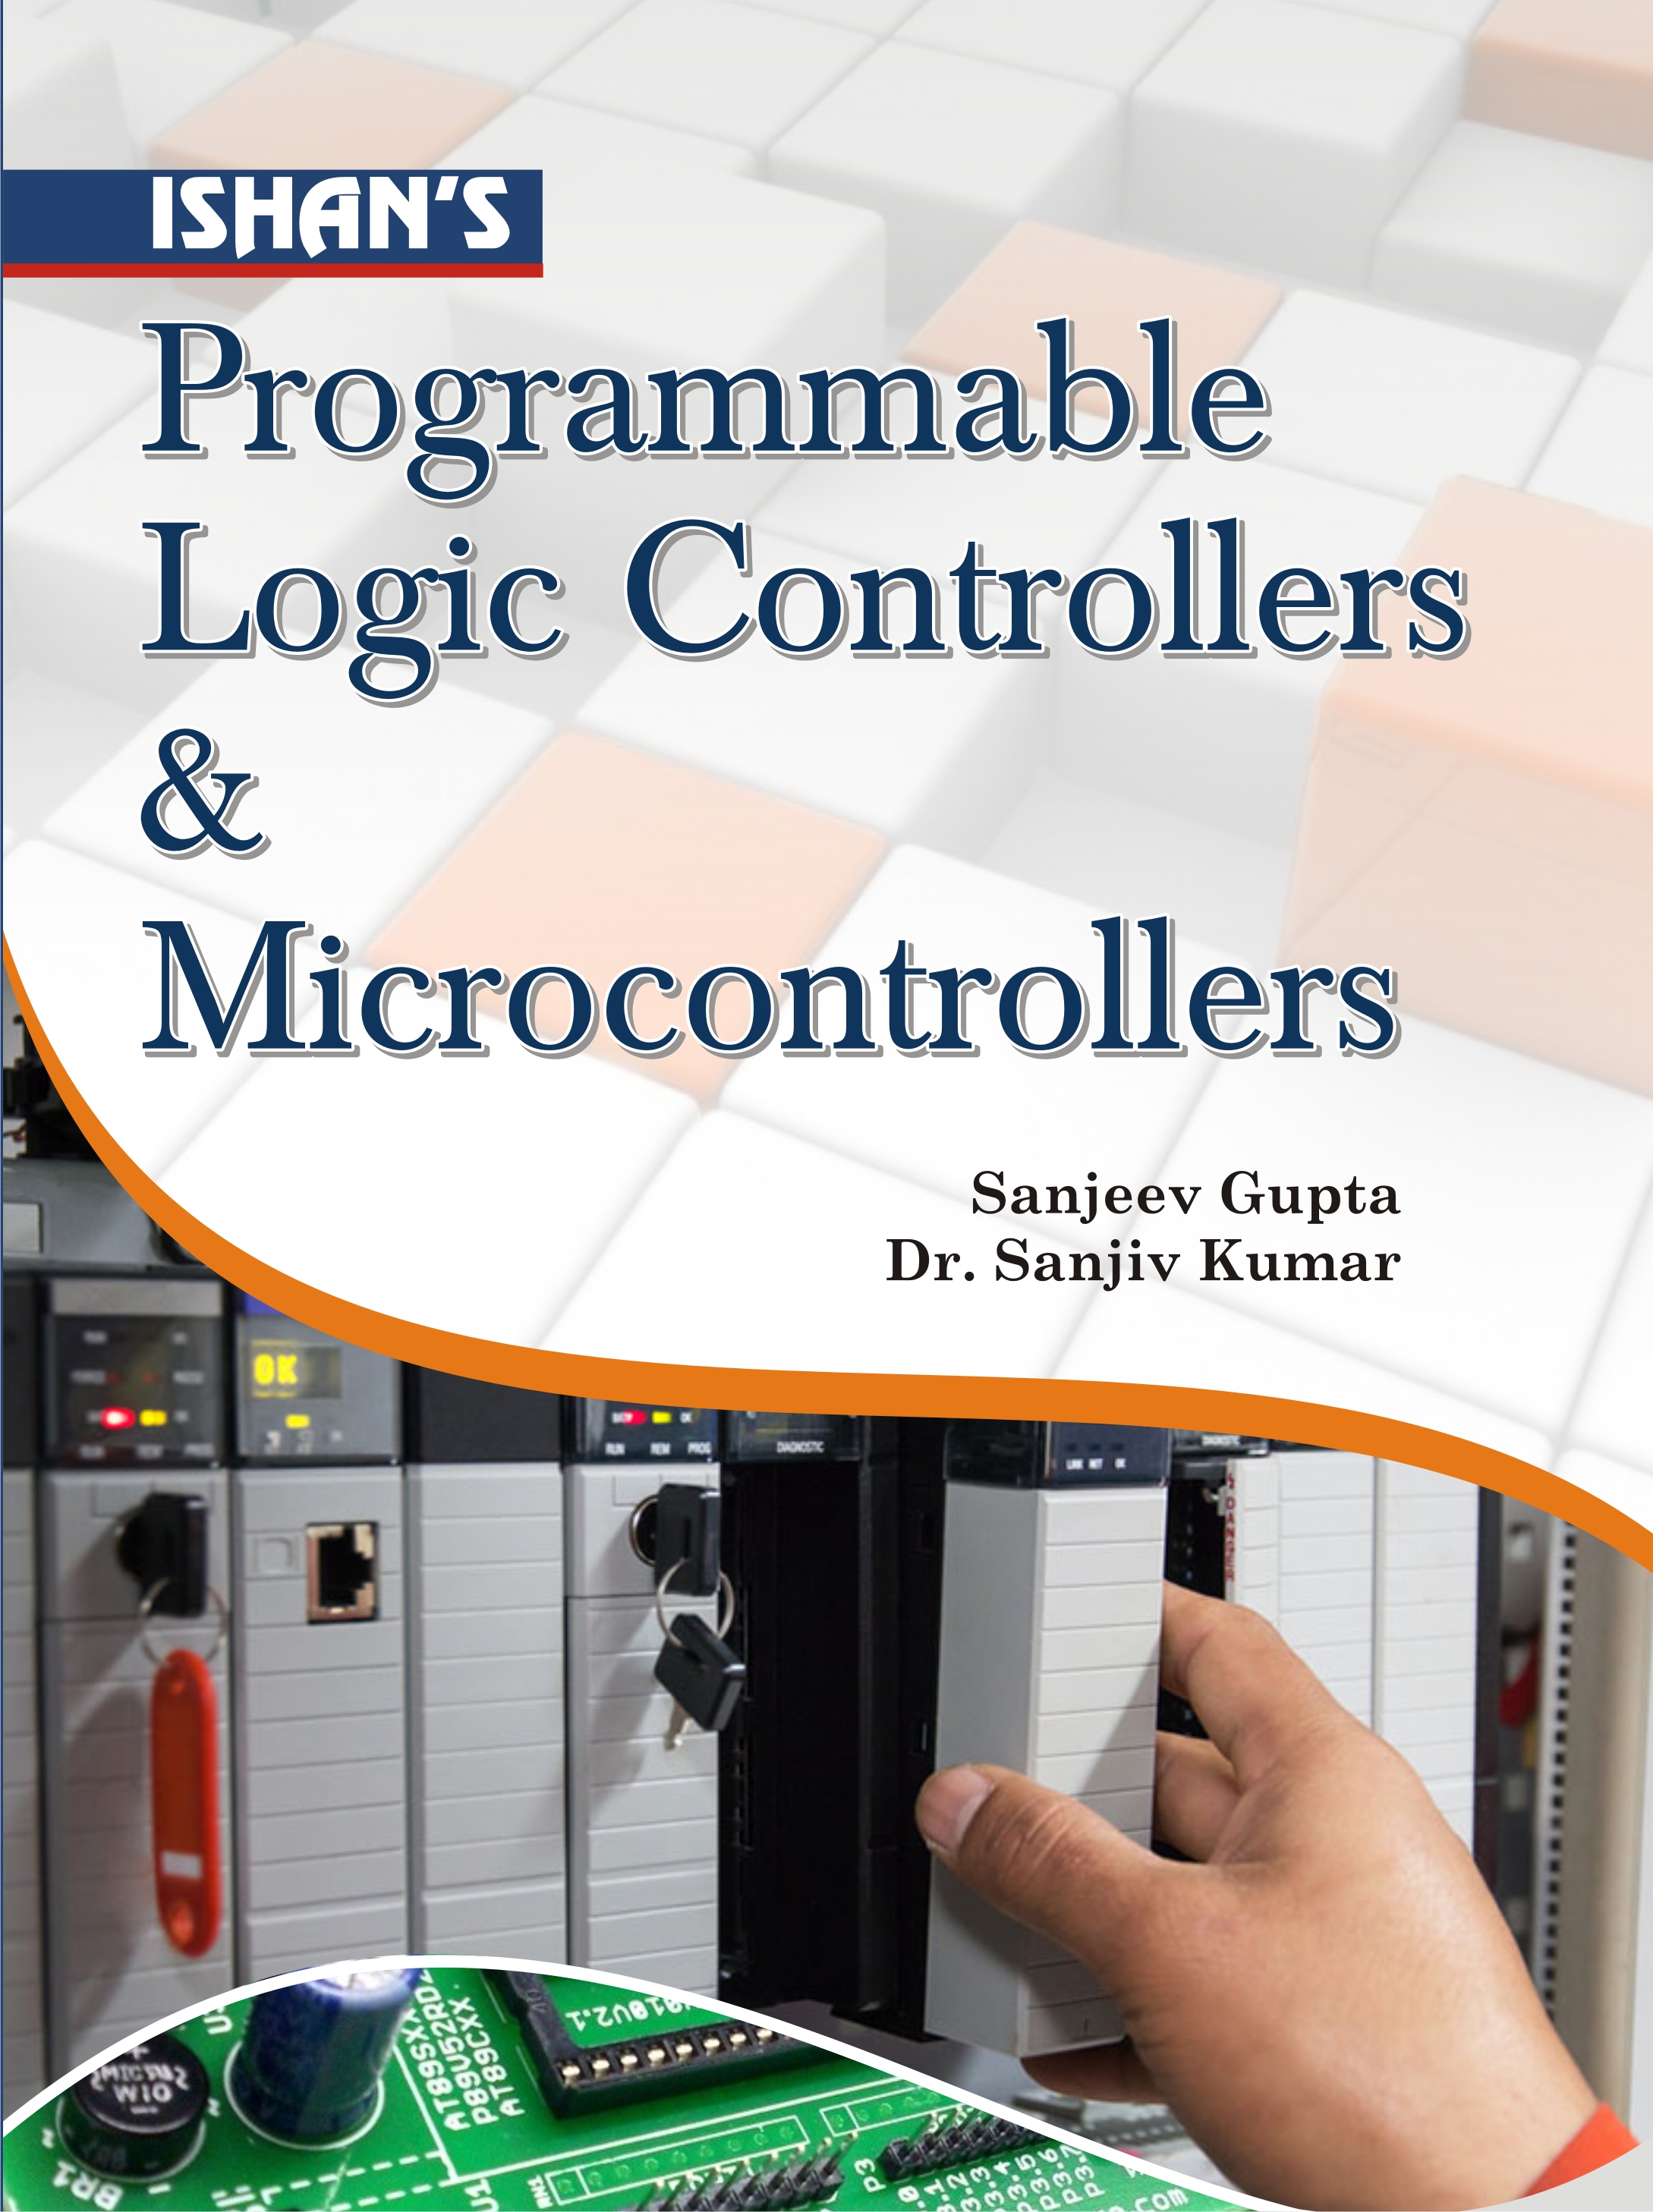 Programmable Logic Controllers & Microcontrollers